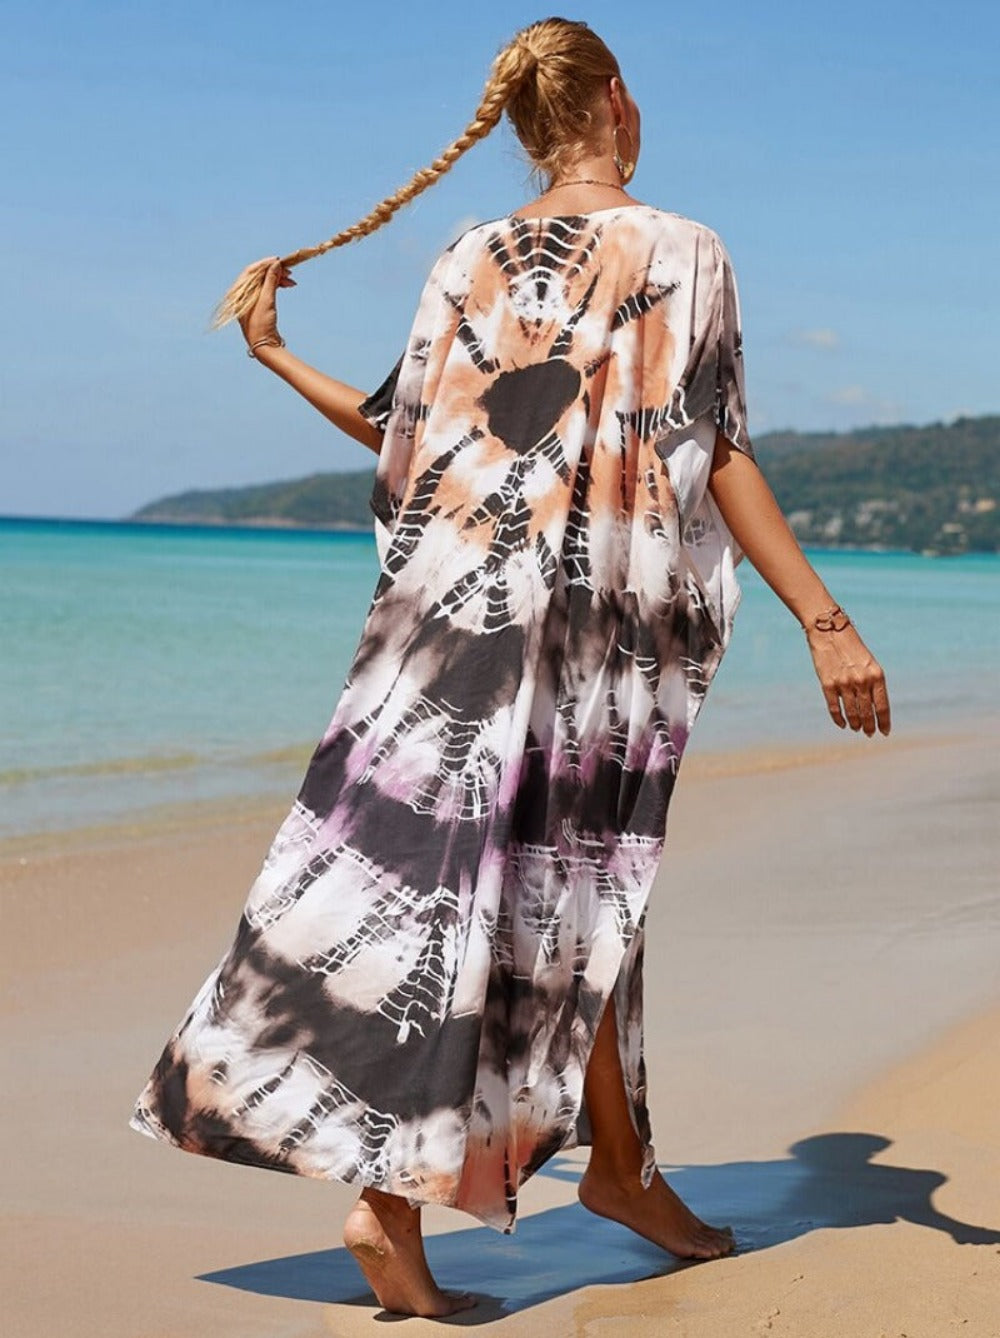 Everyday.Discount womens boho beach dresses pareo coverup with sleeves floral holiday vacation oversize swimmwear overcoat cotton beach bathing suits plage saida praia 